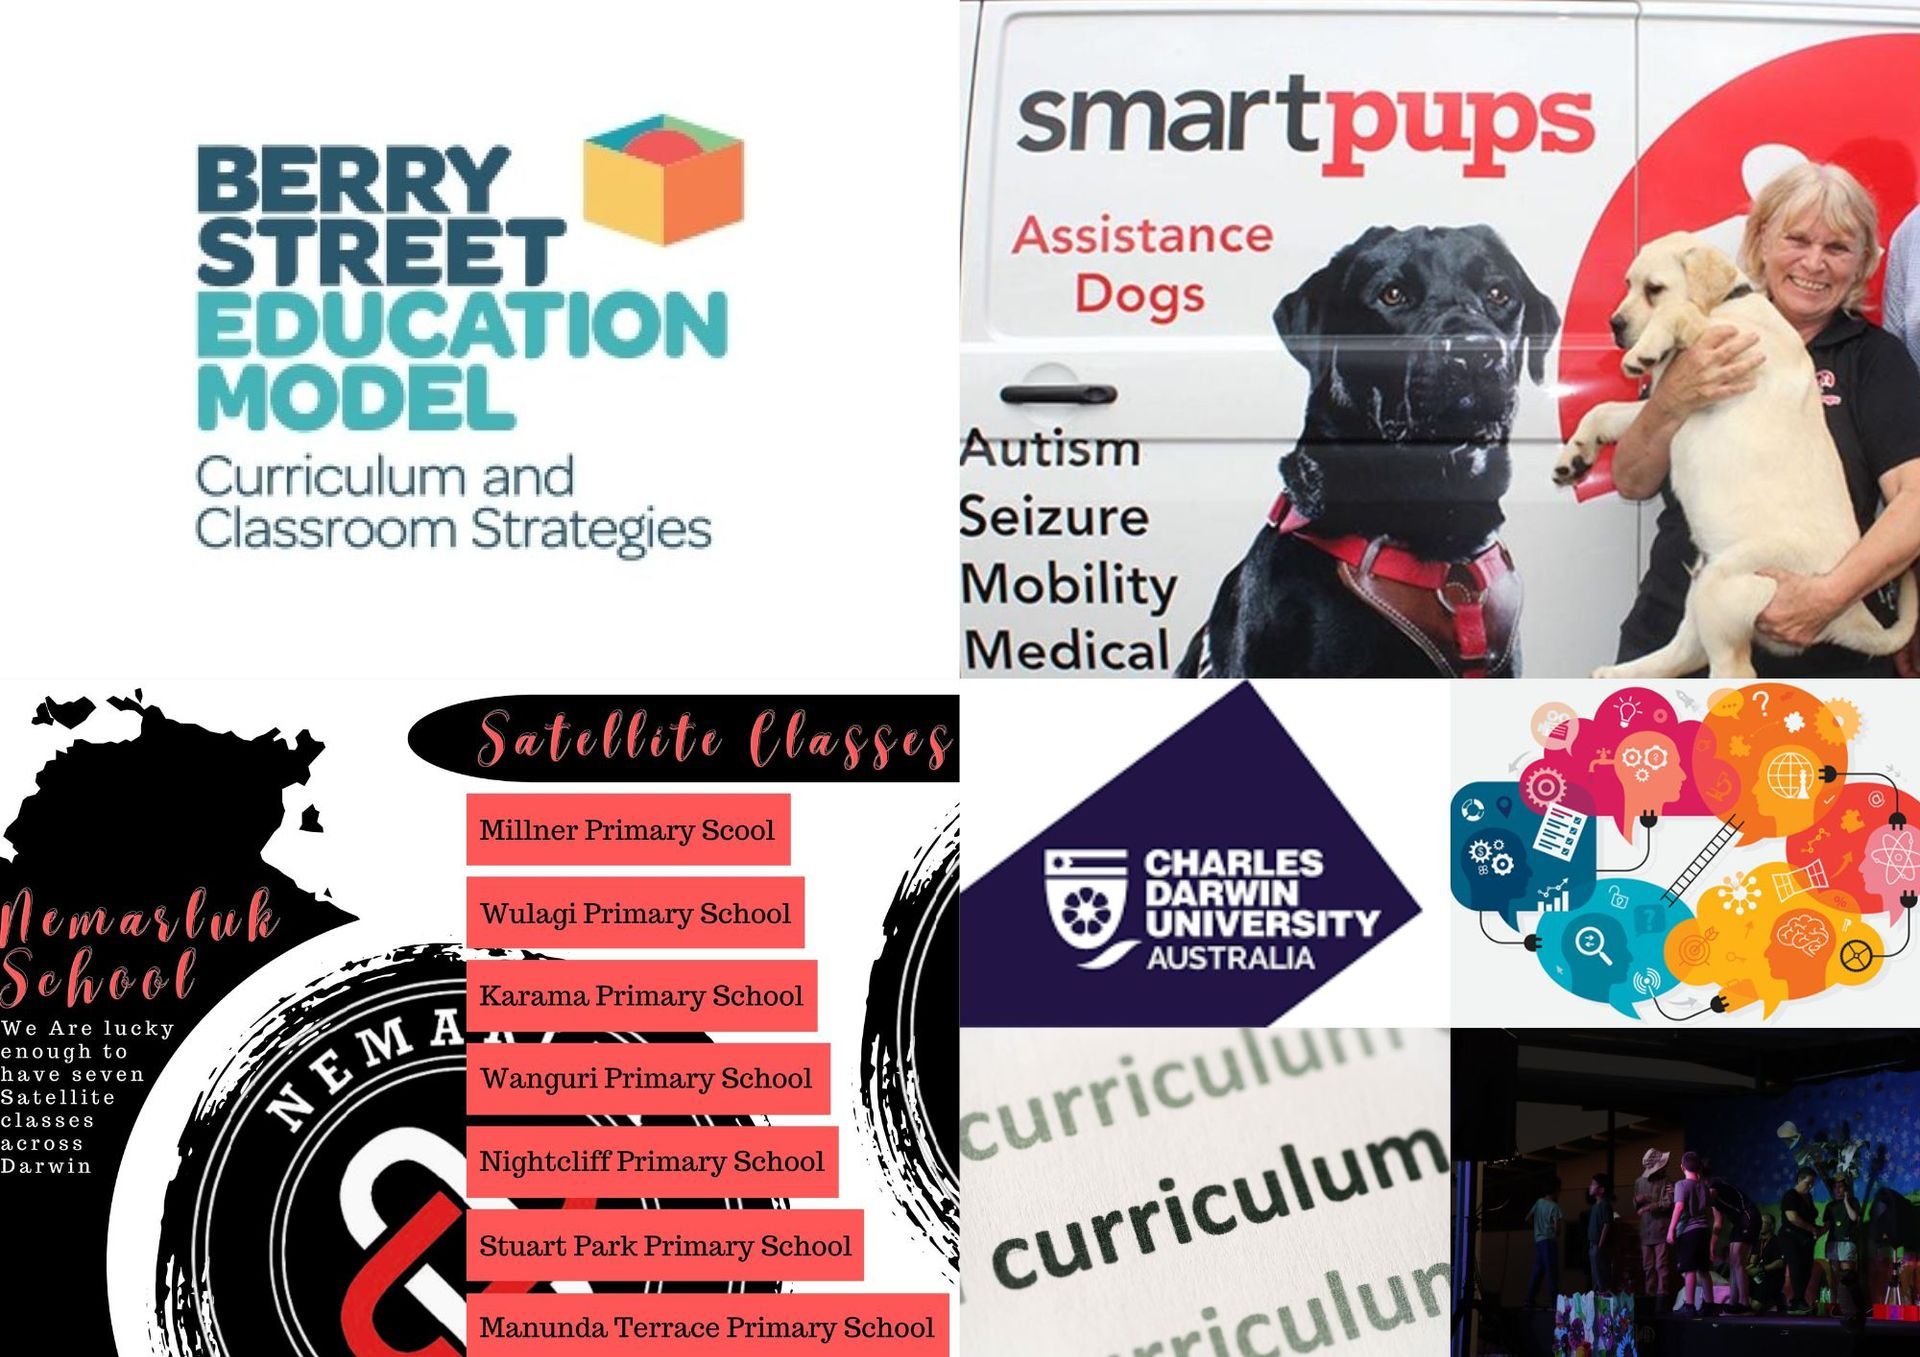 A collage of advertisements for berry street education model curriculum and classroom strategies